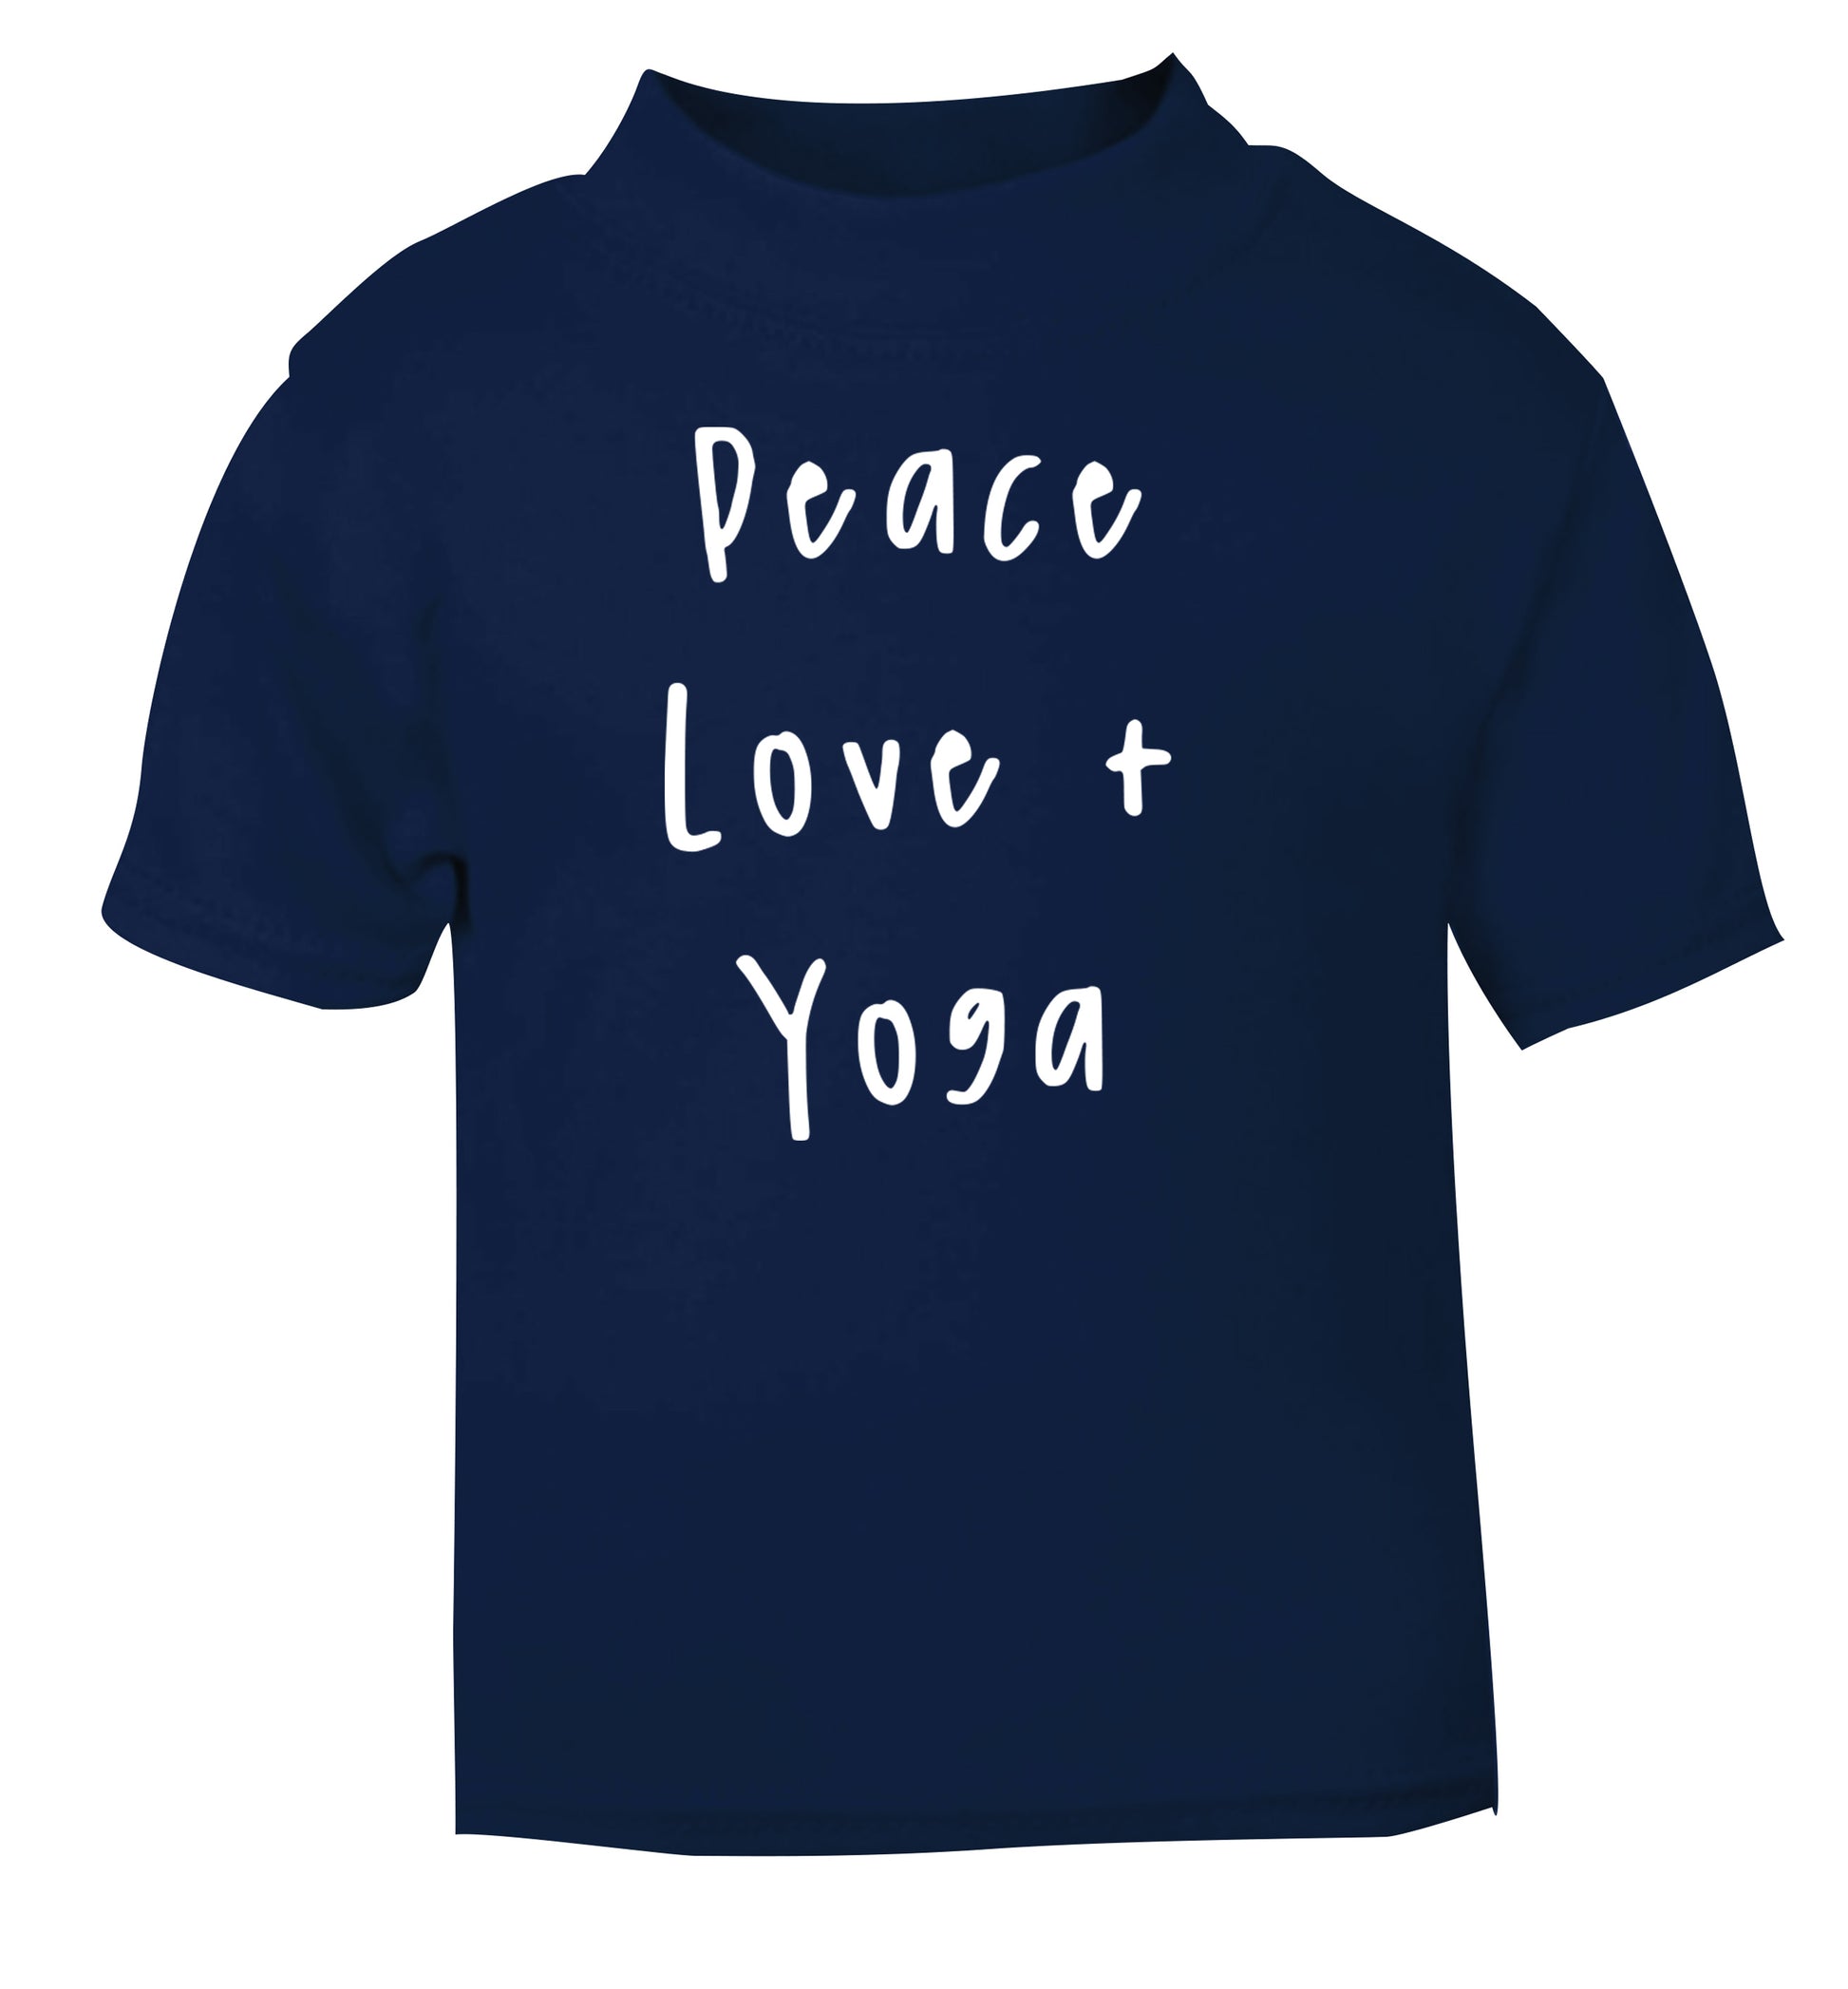 Peace love and yoga navy Baby Toddler Tshirt 2 Years